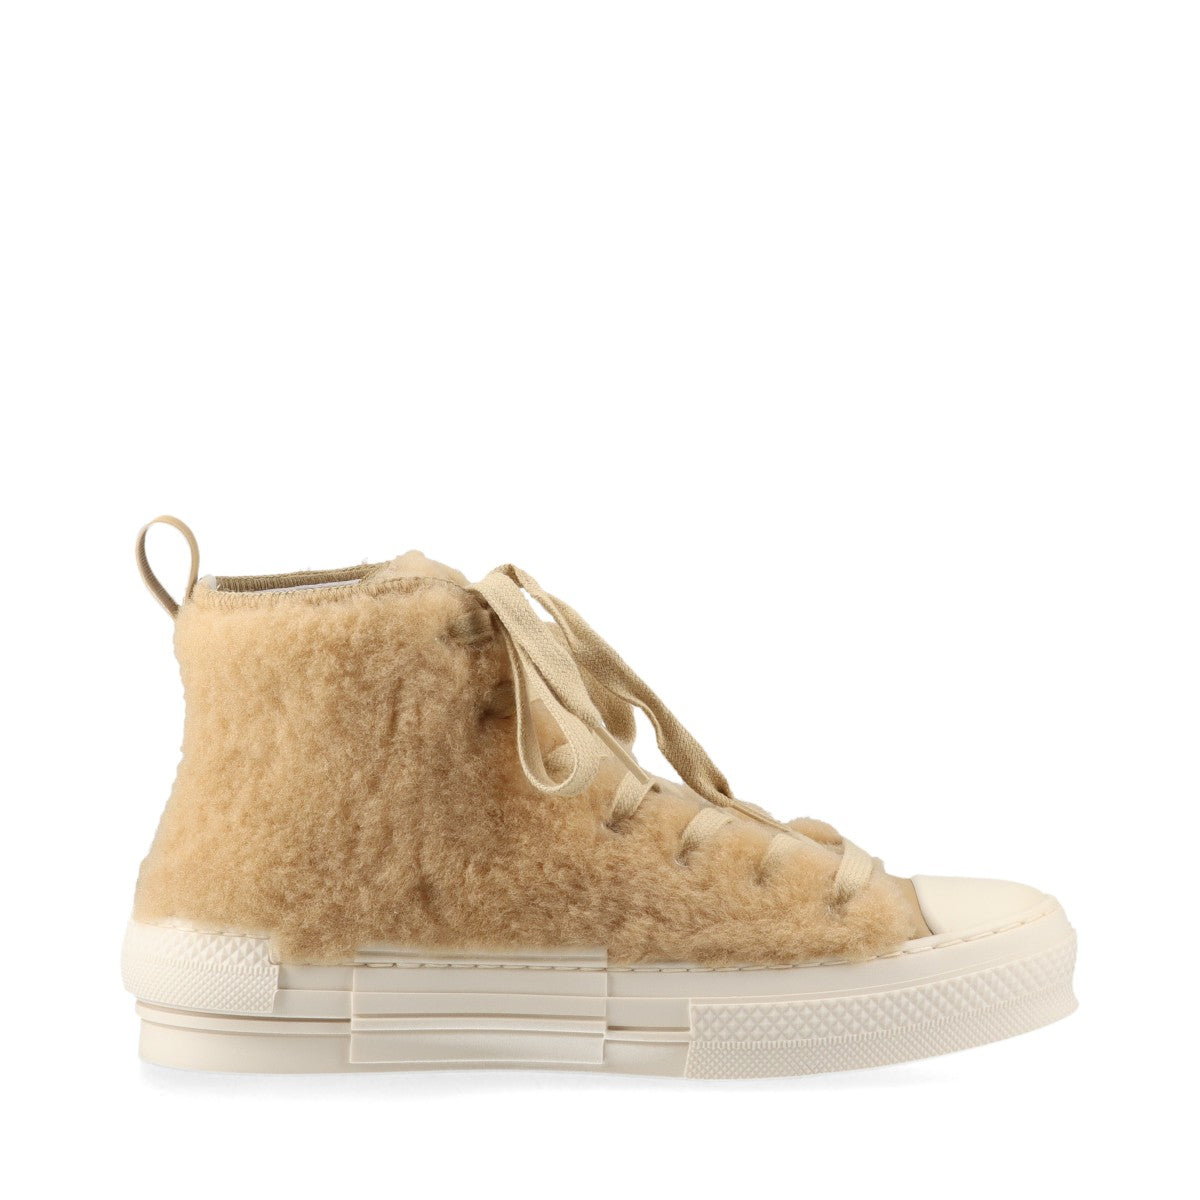 Dior x ERL Boa High-top Sneakers EU37 Ladies' Beige DC1022 rabbit motif Replacement string Box There is a bag